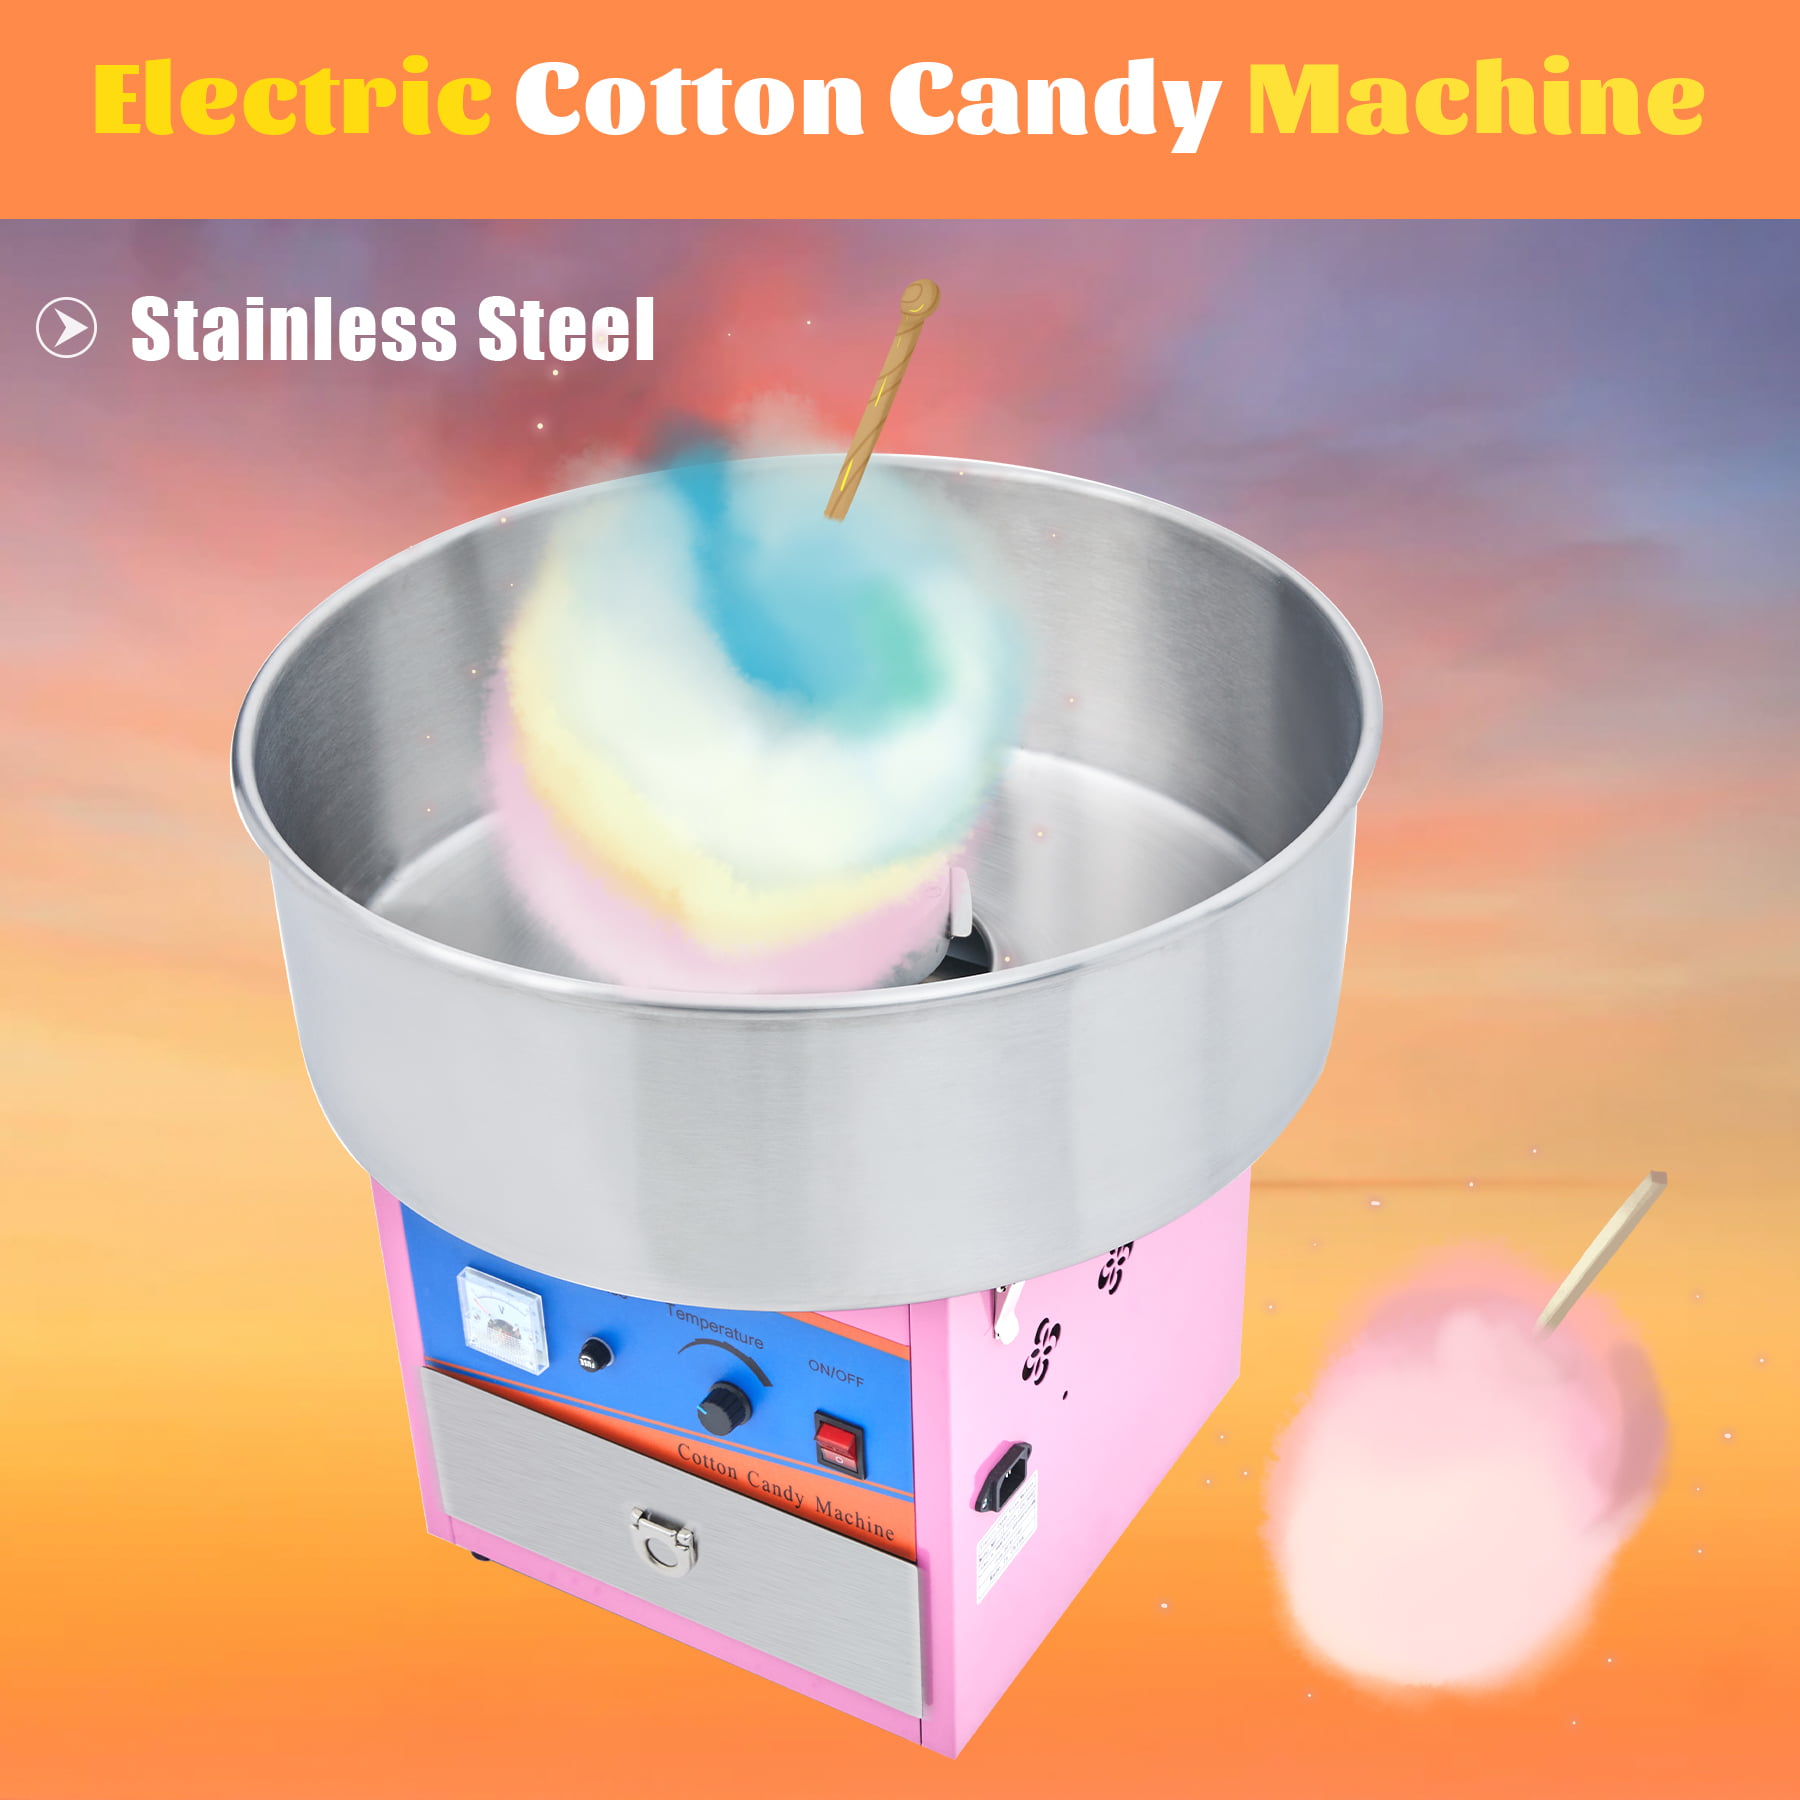 Cotton Candy Machine for Kids,Cotton Candy Machine for Home Birthday Family Party Christmas Gift Includes 10 Cones And Sugar Scoop Lemail wig Cotton Candy Maker 